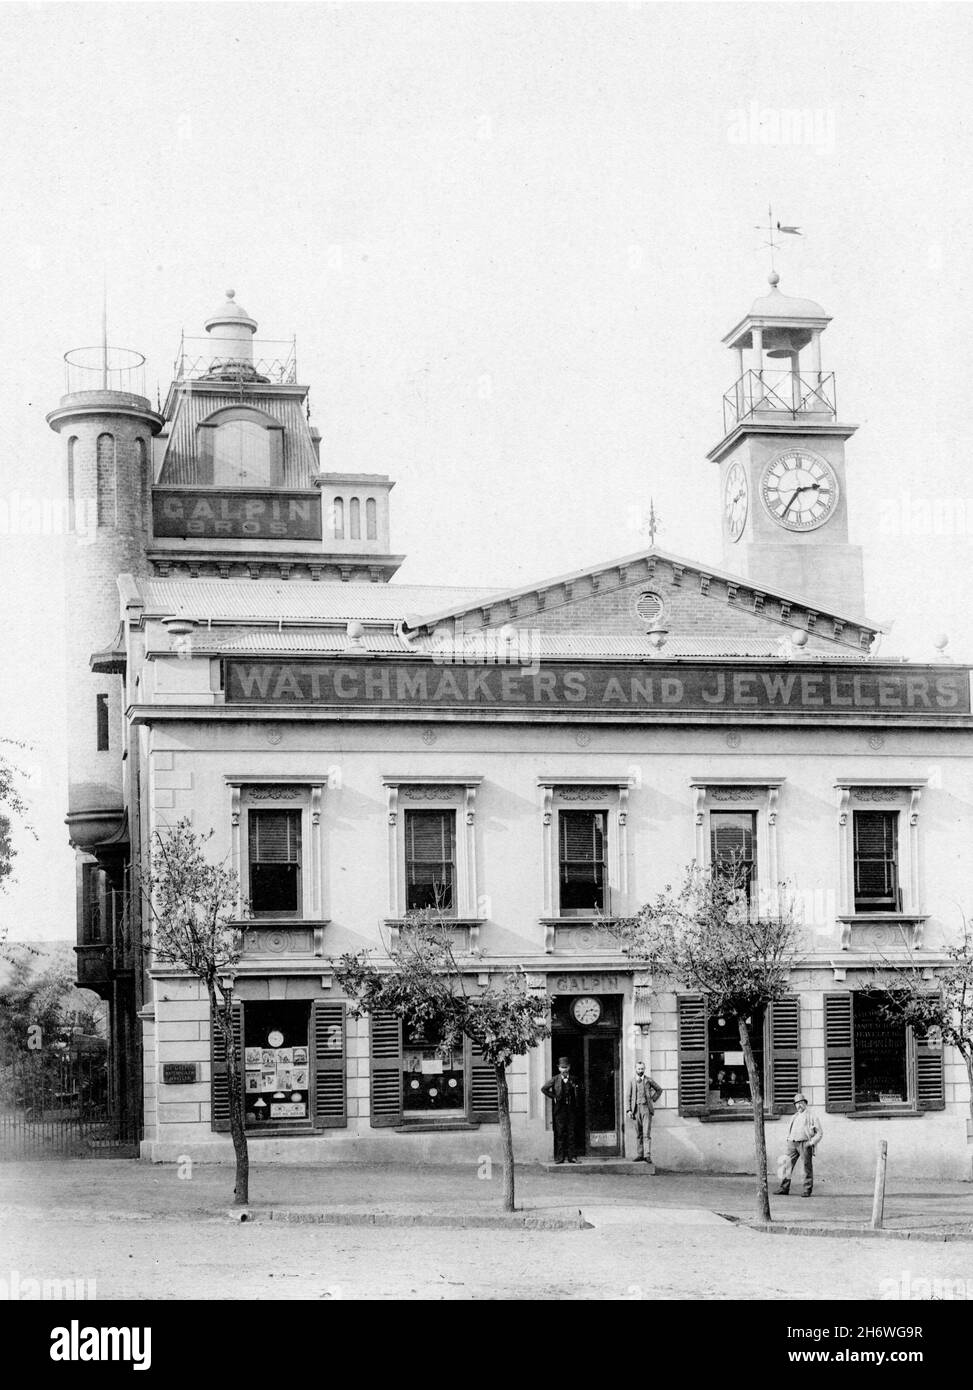 Historic image of 'Galpin Brothers' Establishment', now the Observatory Museum, Grahamstown, South Africa, photographed in the 1890s. Stock Photo